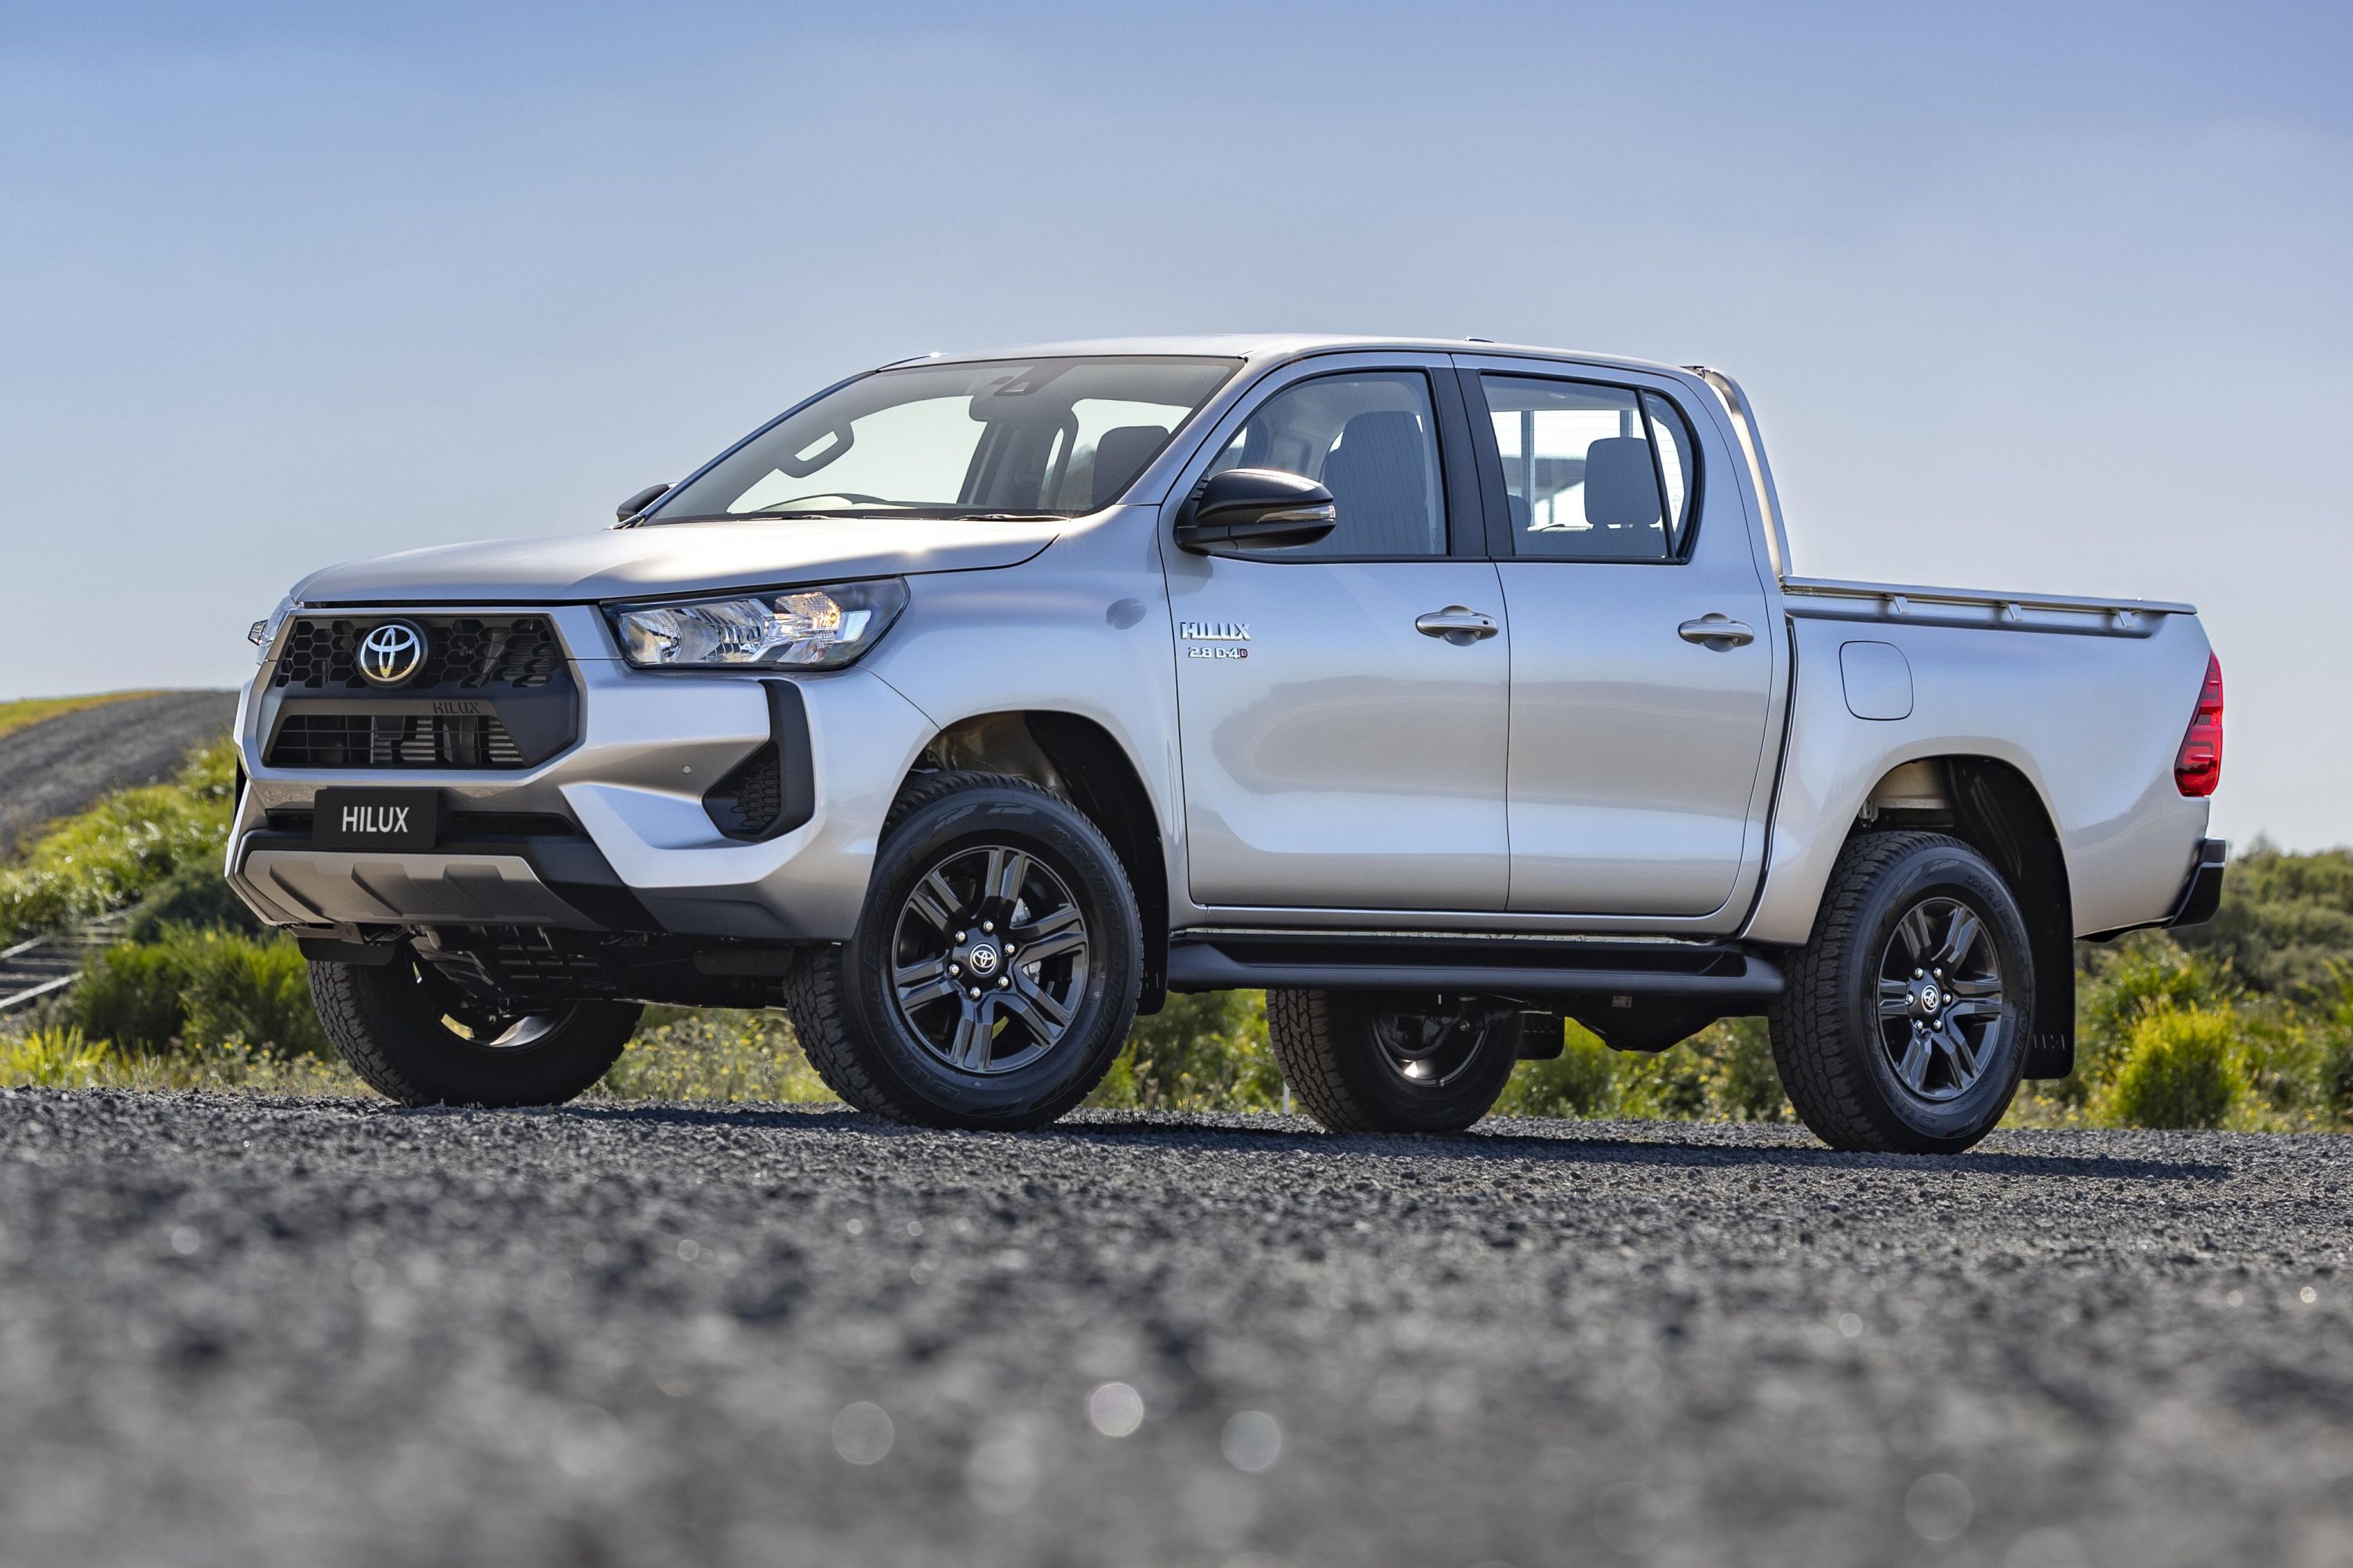 2024 Toyota HiLux VActive Technology Mildhybrid HiLux price and